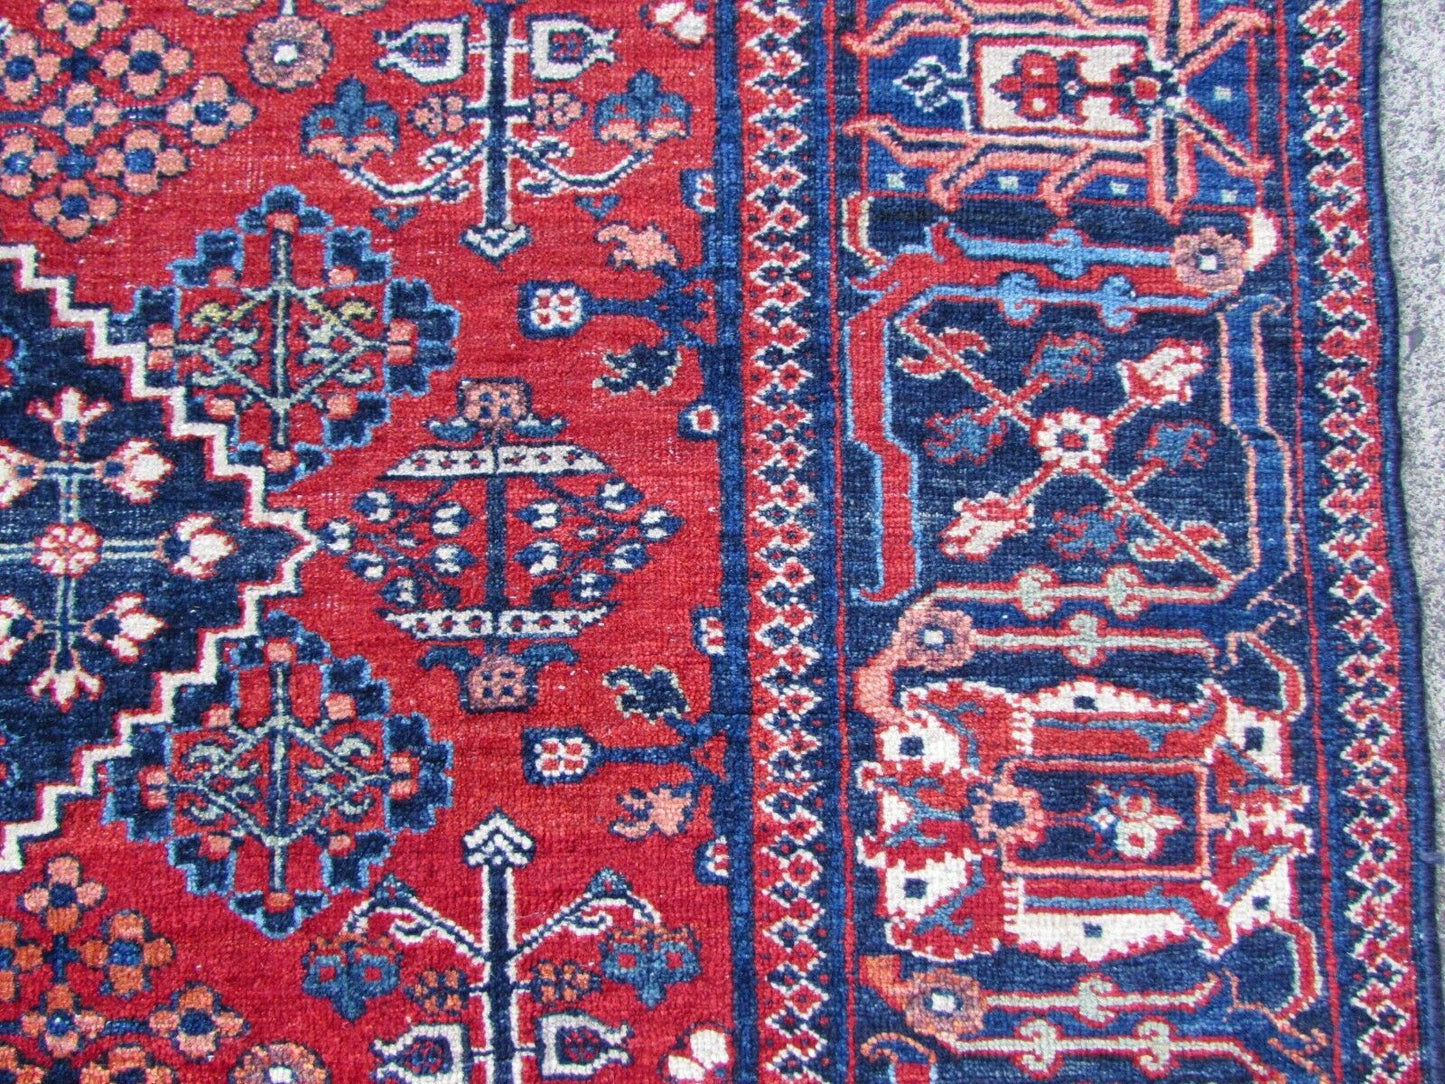 Handmade antique Persian Joshagan rug in bright red color. The rug is from the beginning of 20th century mostly in original good condition, it has some low pile